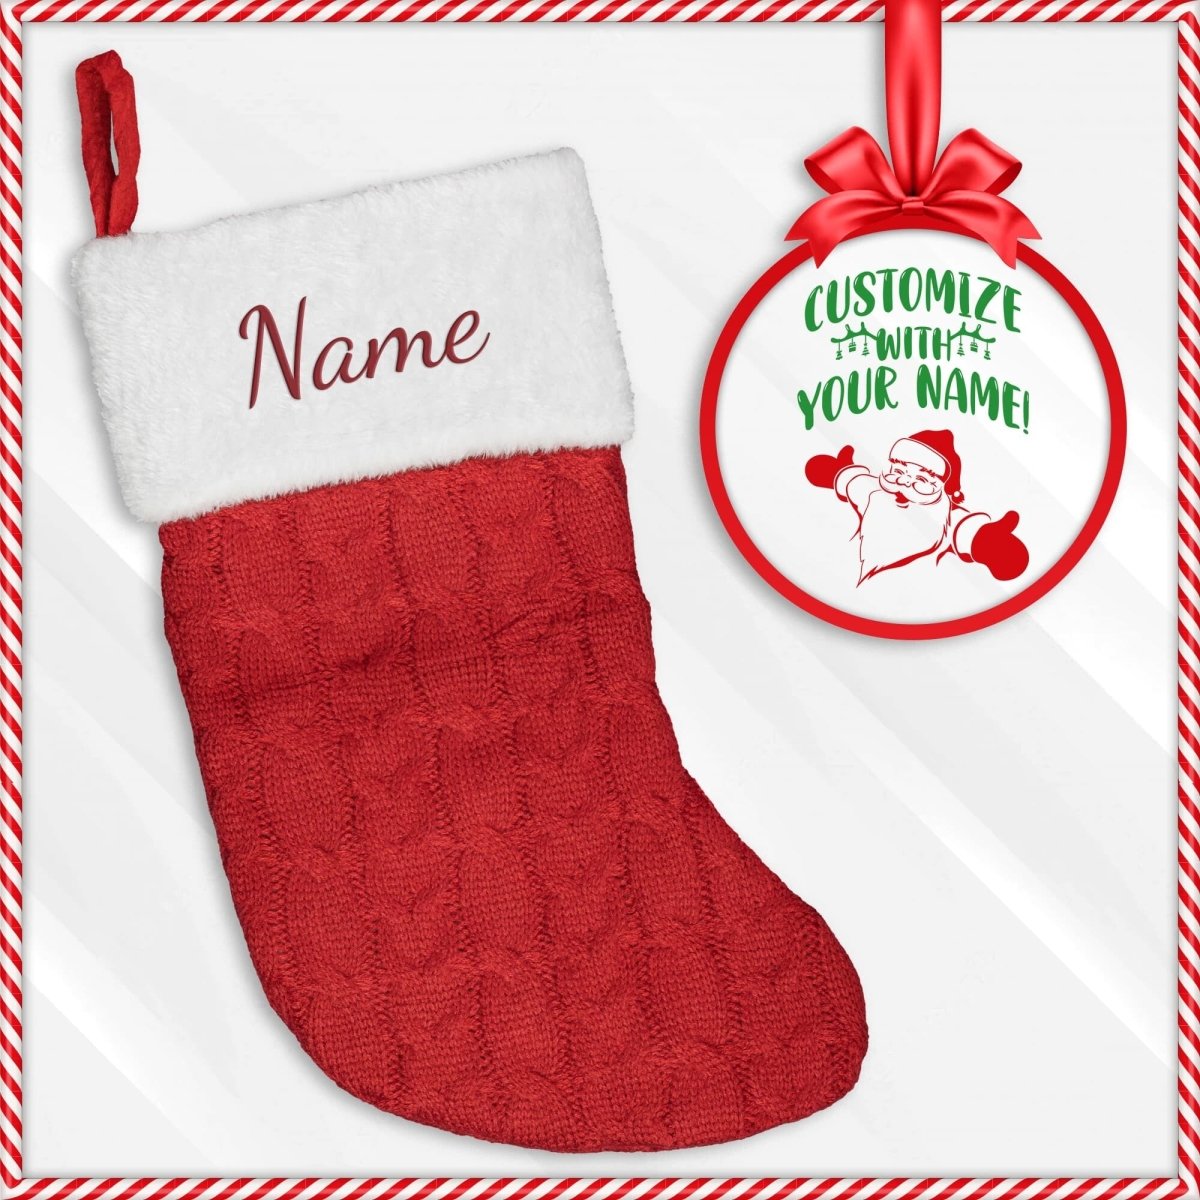 Embroidered Personalized Name Christmas StockingCustomly Gifts